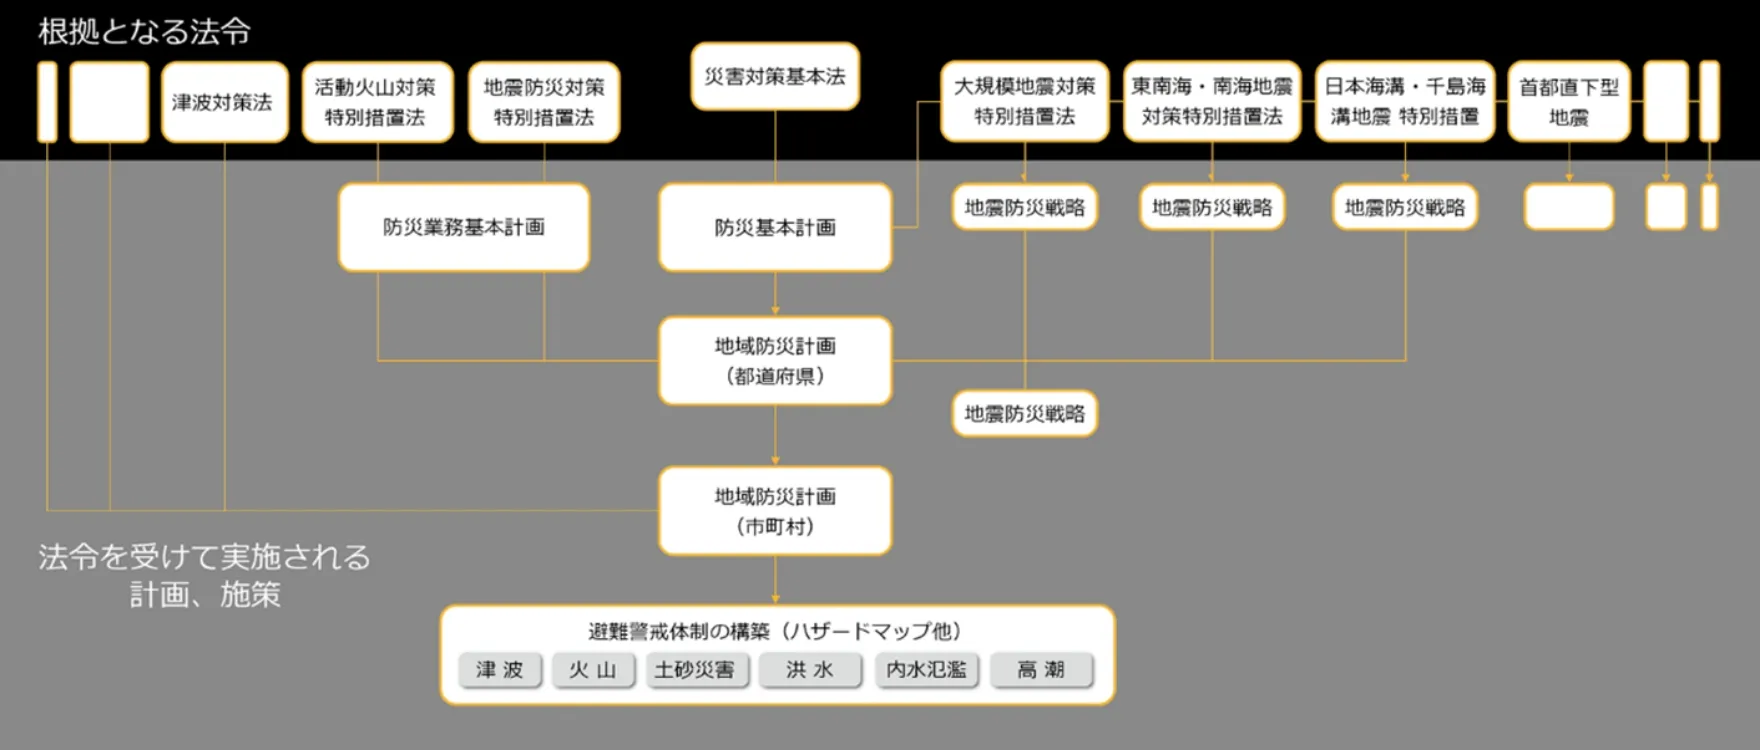 Administrative system for disaster-prevention in Japan